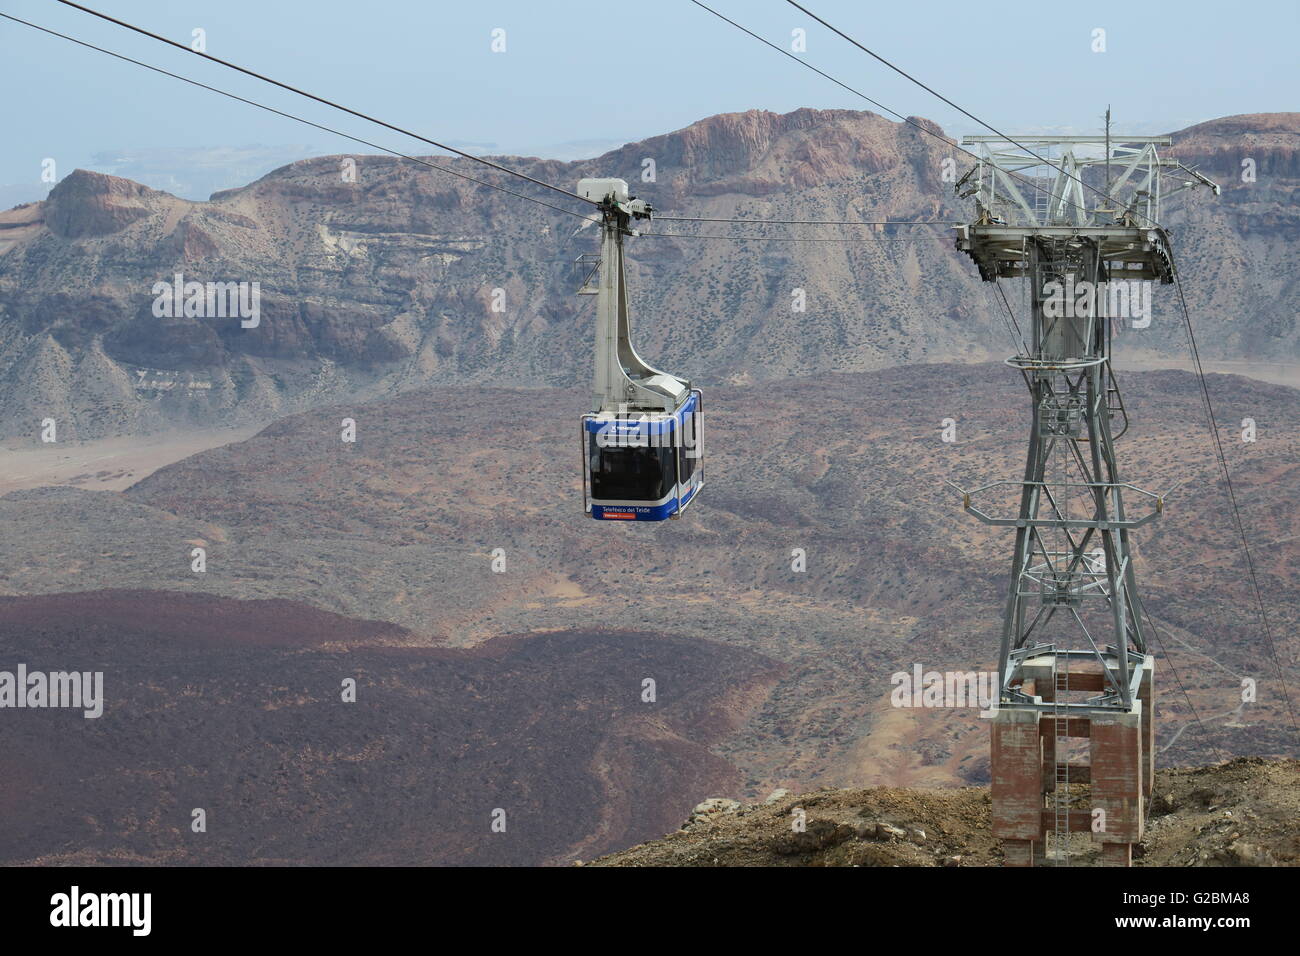 Cable car in Parque Nacional del Teide, Tenerife. It reaches within 200m of the summit of Pico del Teide, the highest mountain in Spain. Stock Photo